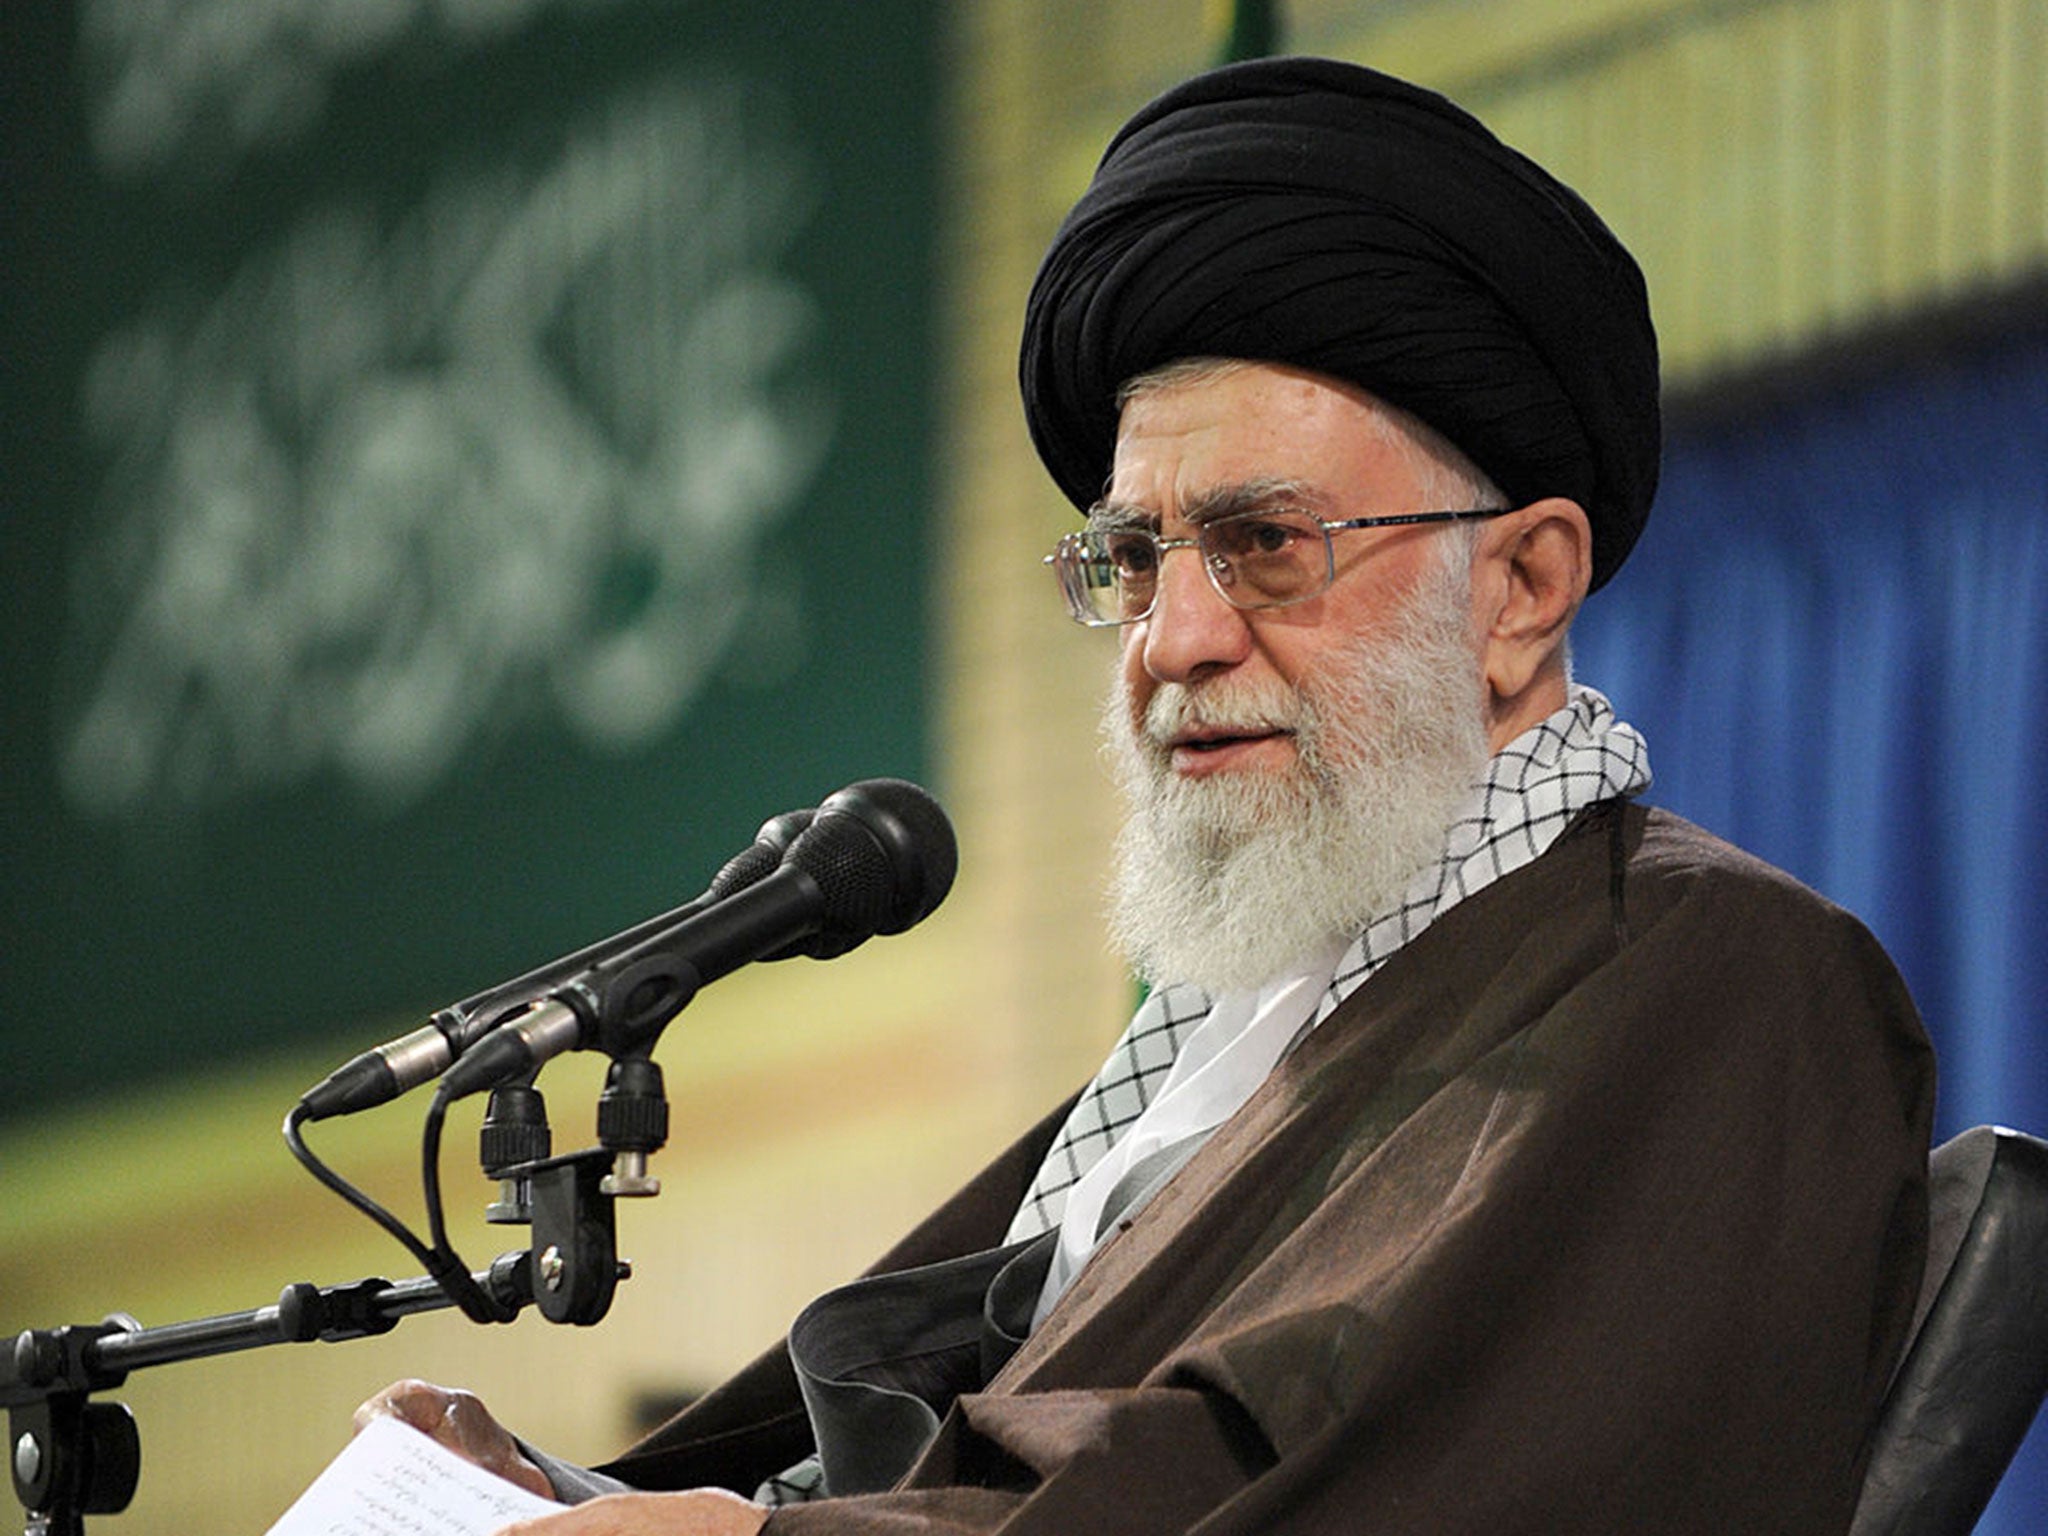 Ayatollah Ali Khamenei appeared to be healthy while addressing environmental activists